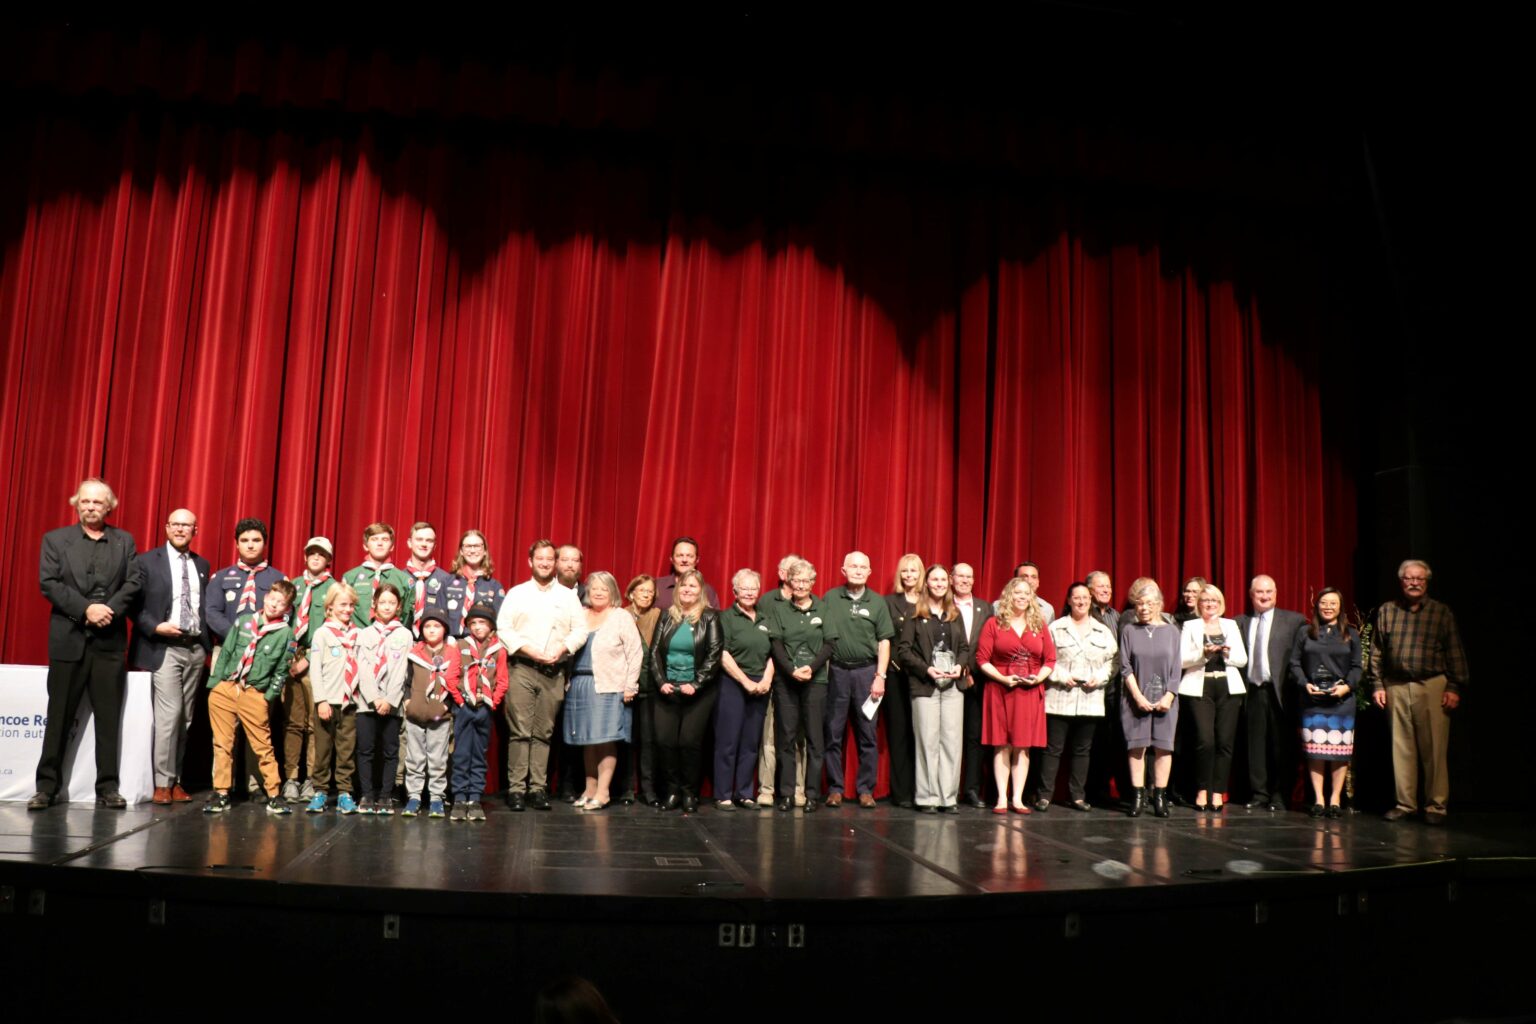 All of the 2023 conservation award recipients standing side by side on the stage with a red curtain behind them.